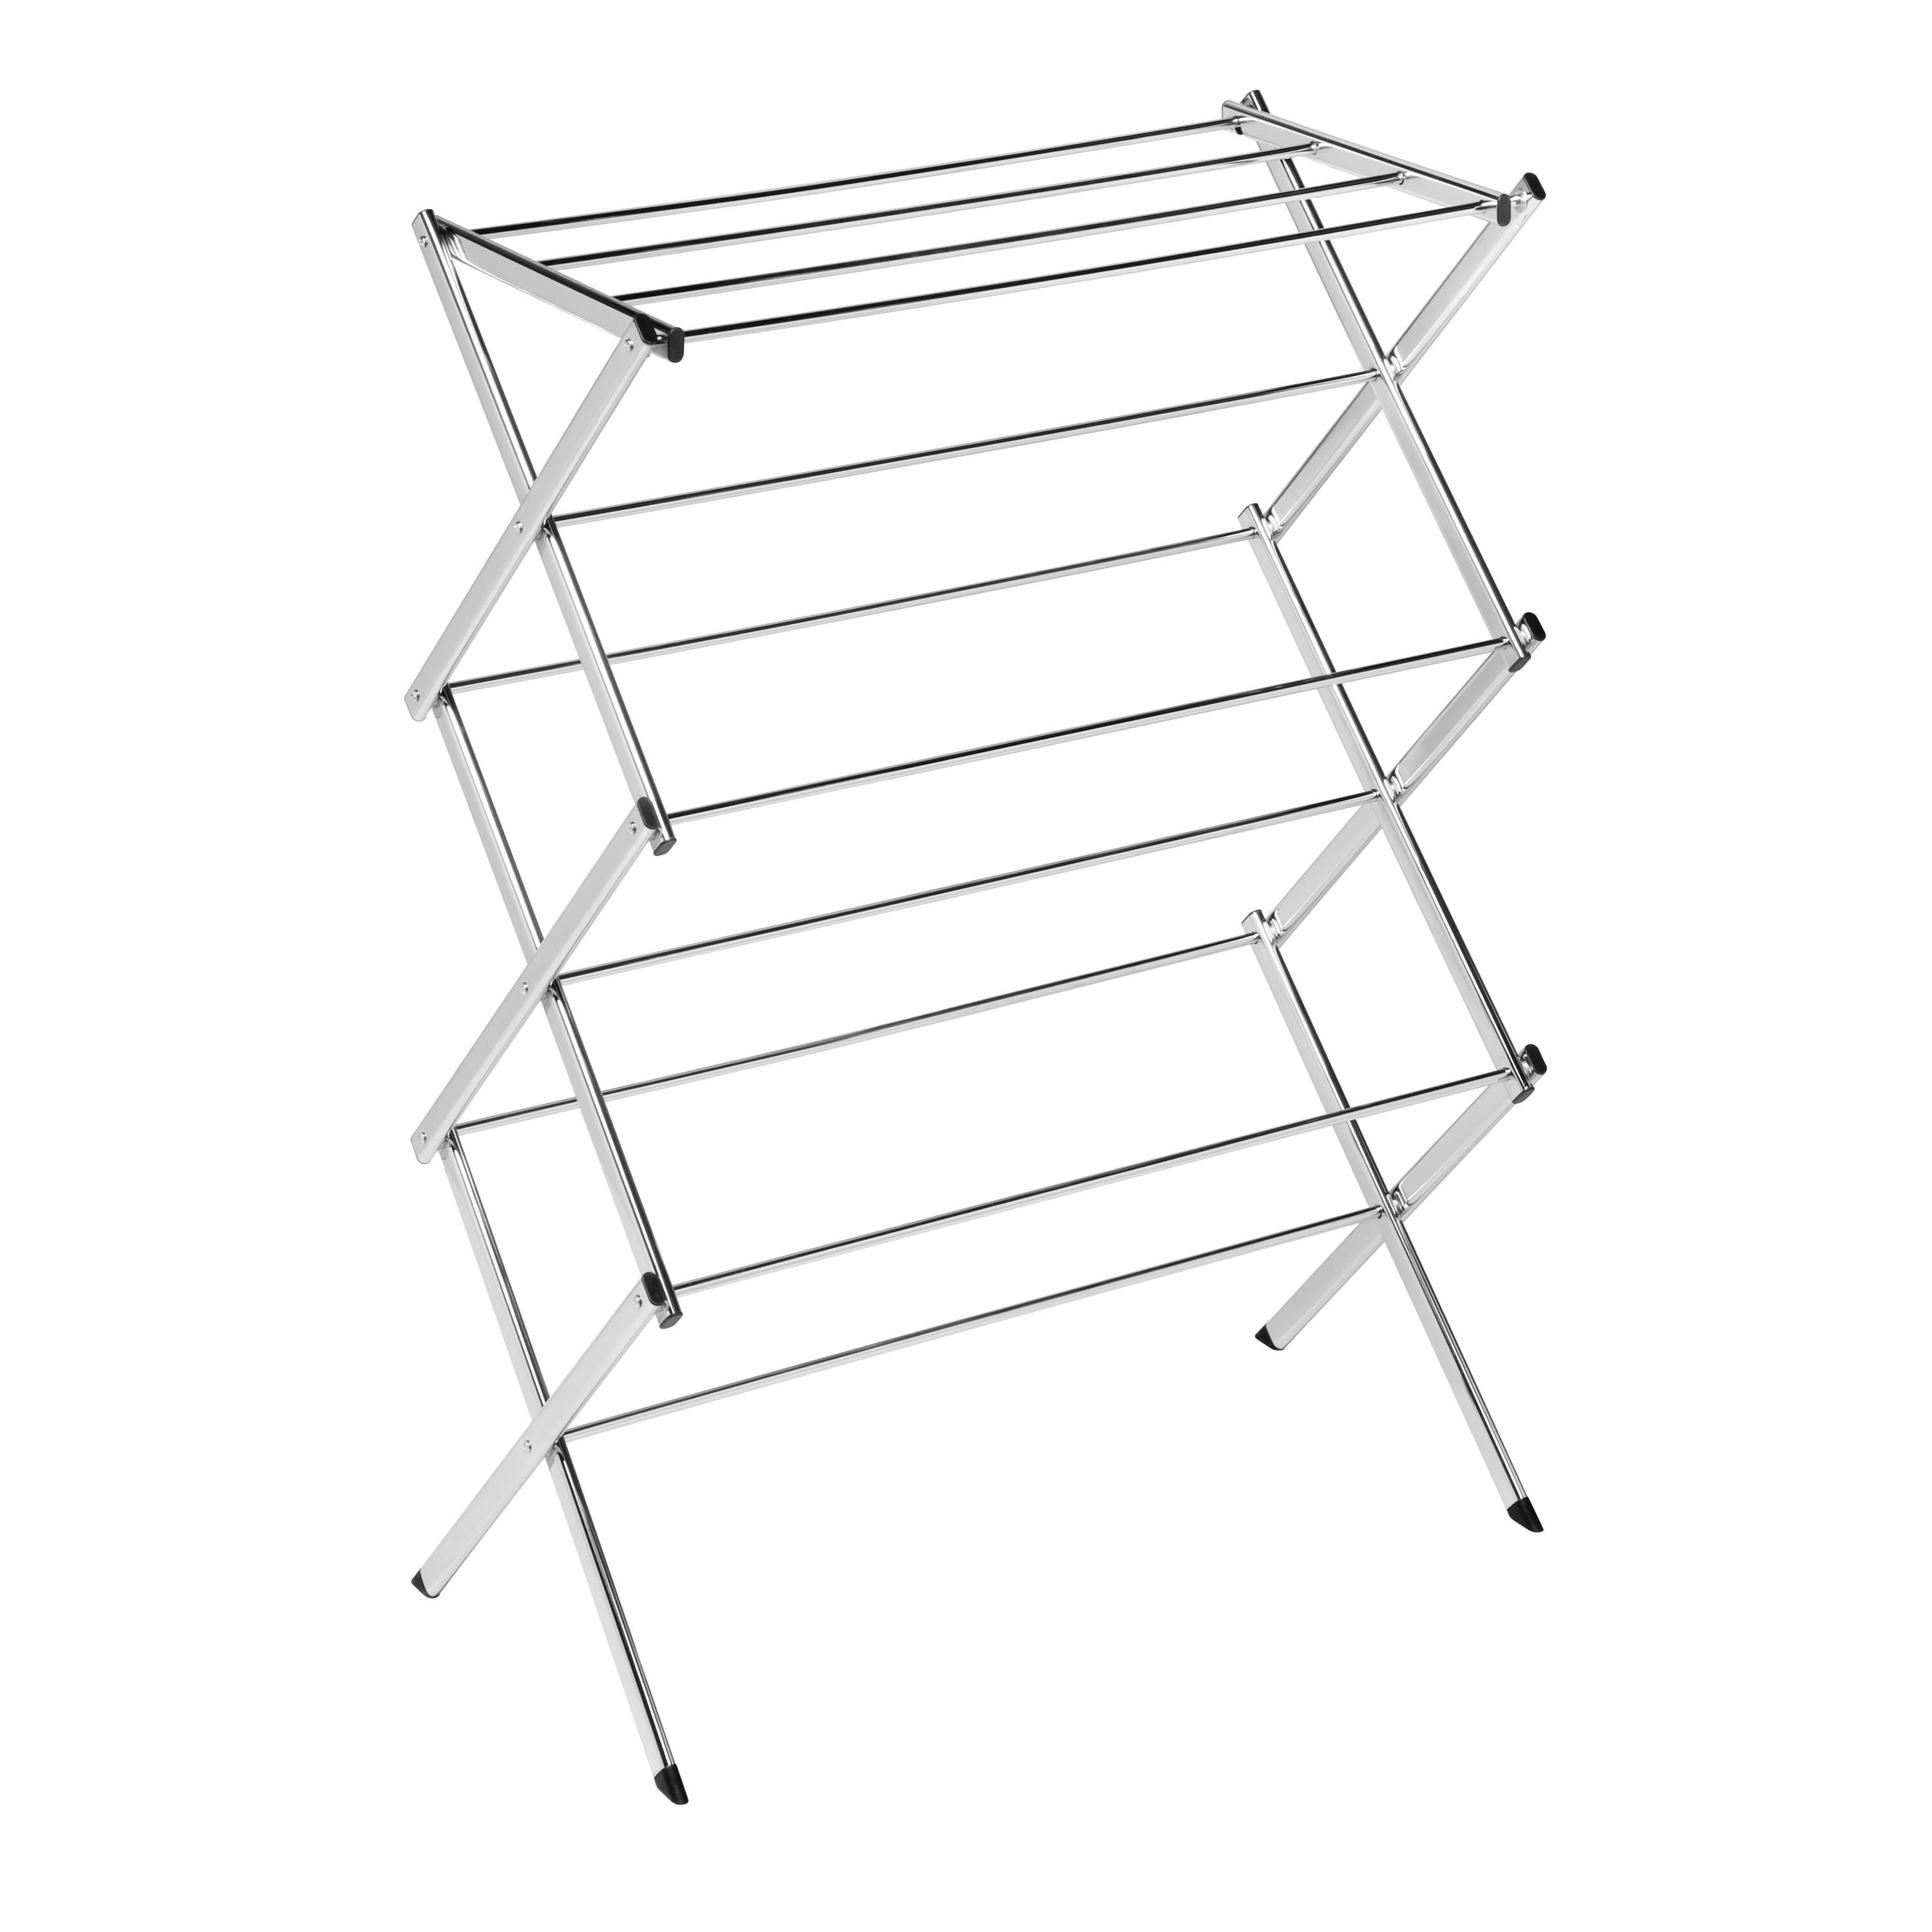 HEAVY DUTY 3 TIER CONCERTINA CLOTH DRIER AIRER WHITE 